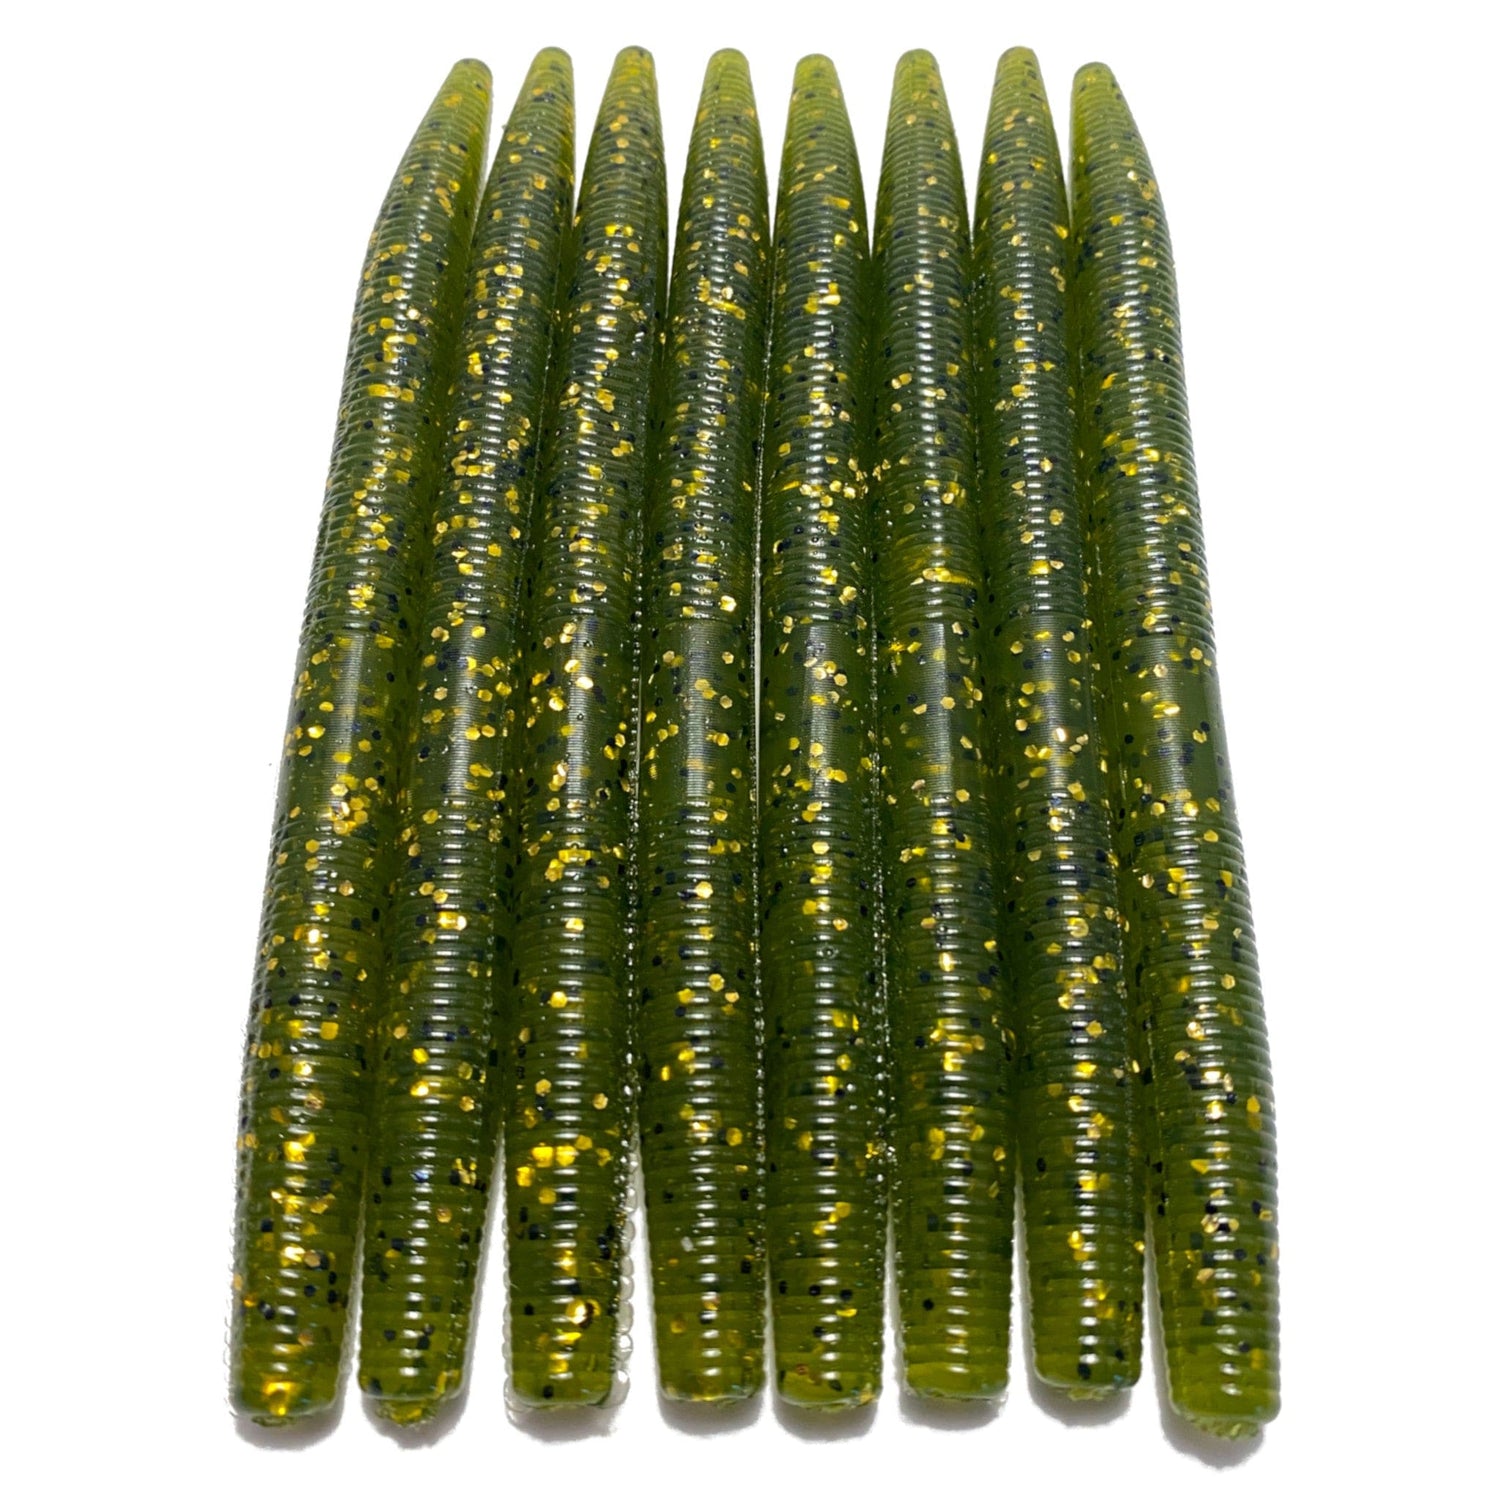 Obee Stick - Watermelon Gold - Fishing Baits & Lures